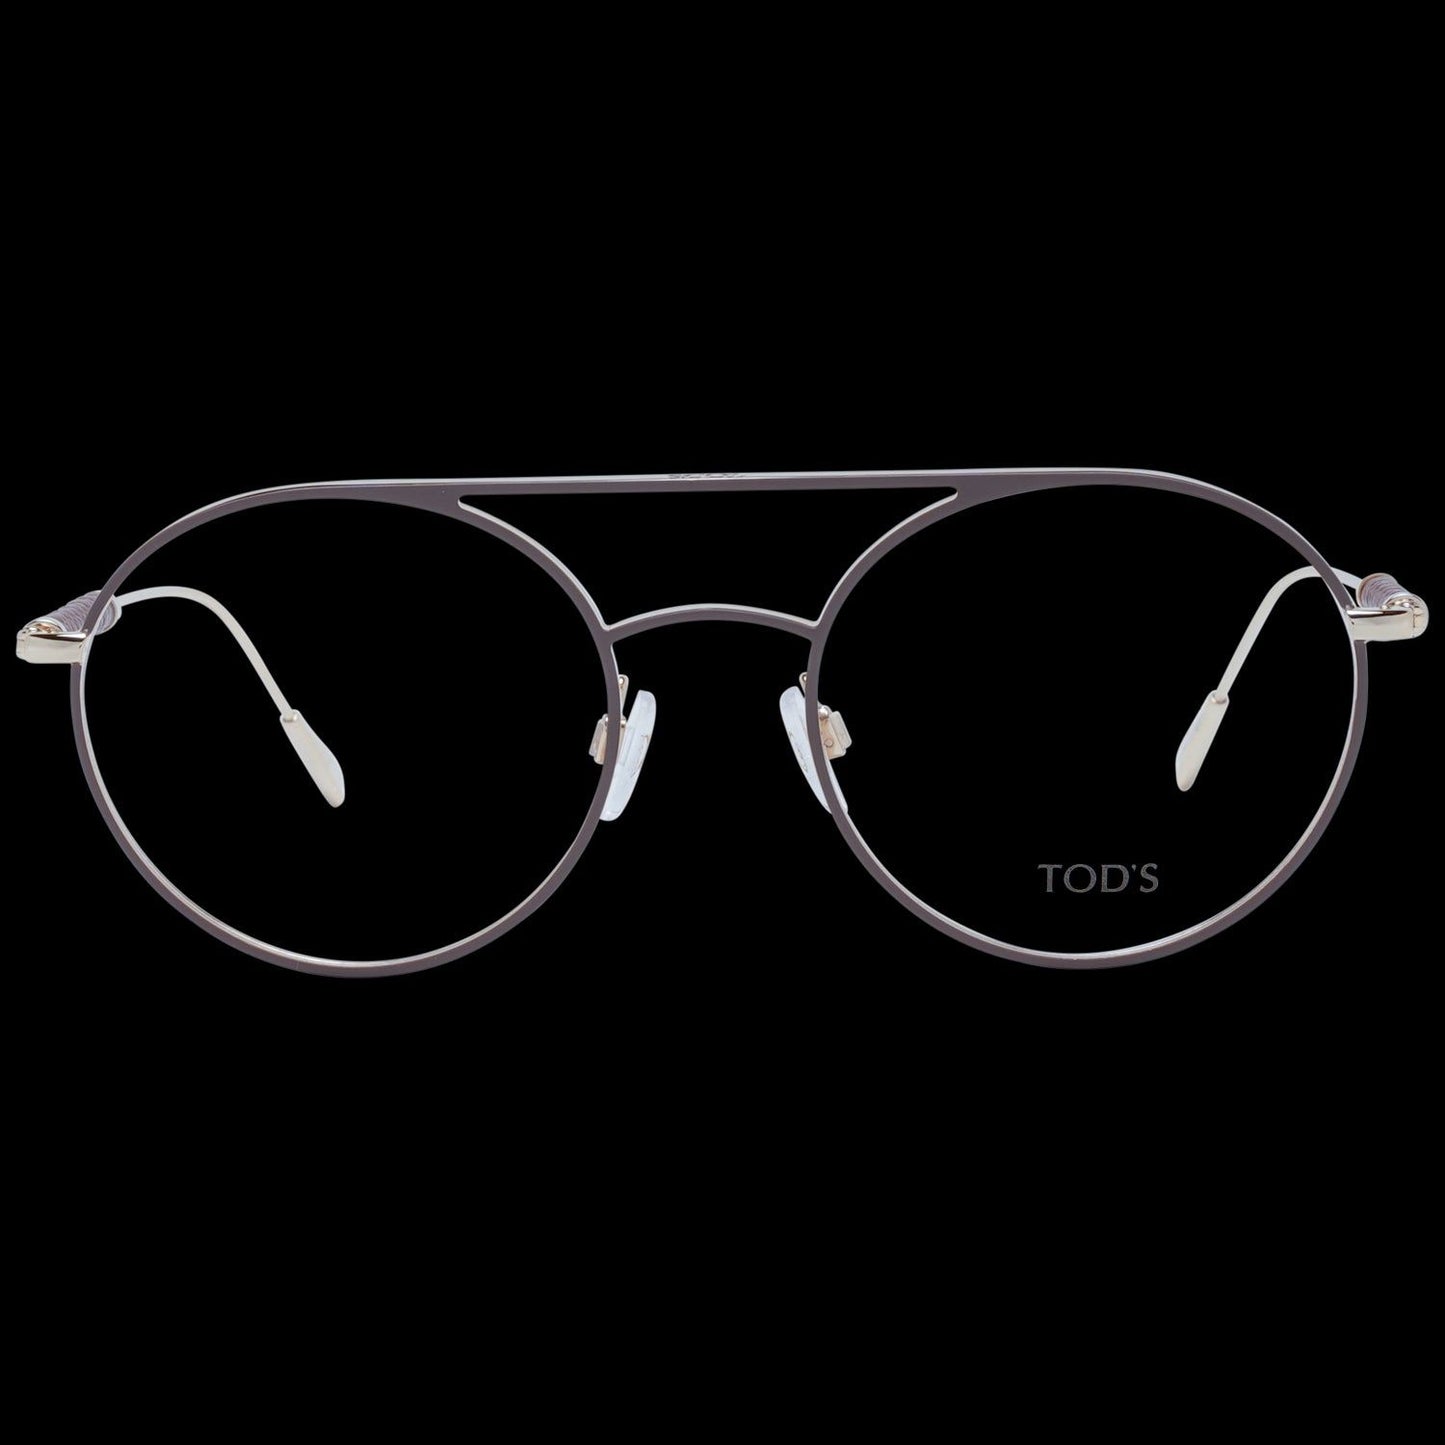 TODS FRAME TODS MOD. TO5200 52028 SUNGLASSES & EYEWEAR tods-mod-to5200-52028